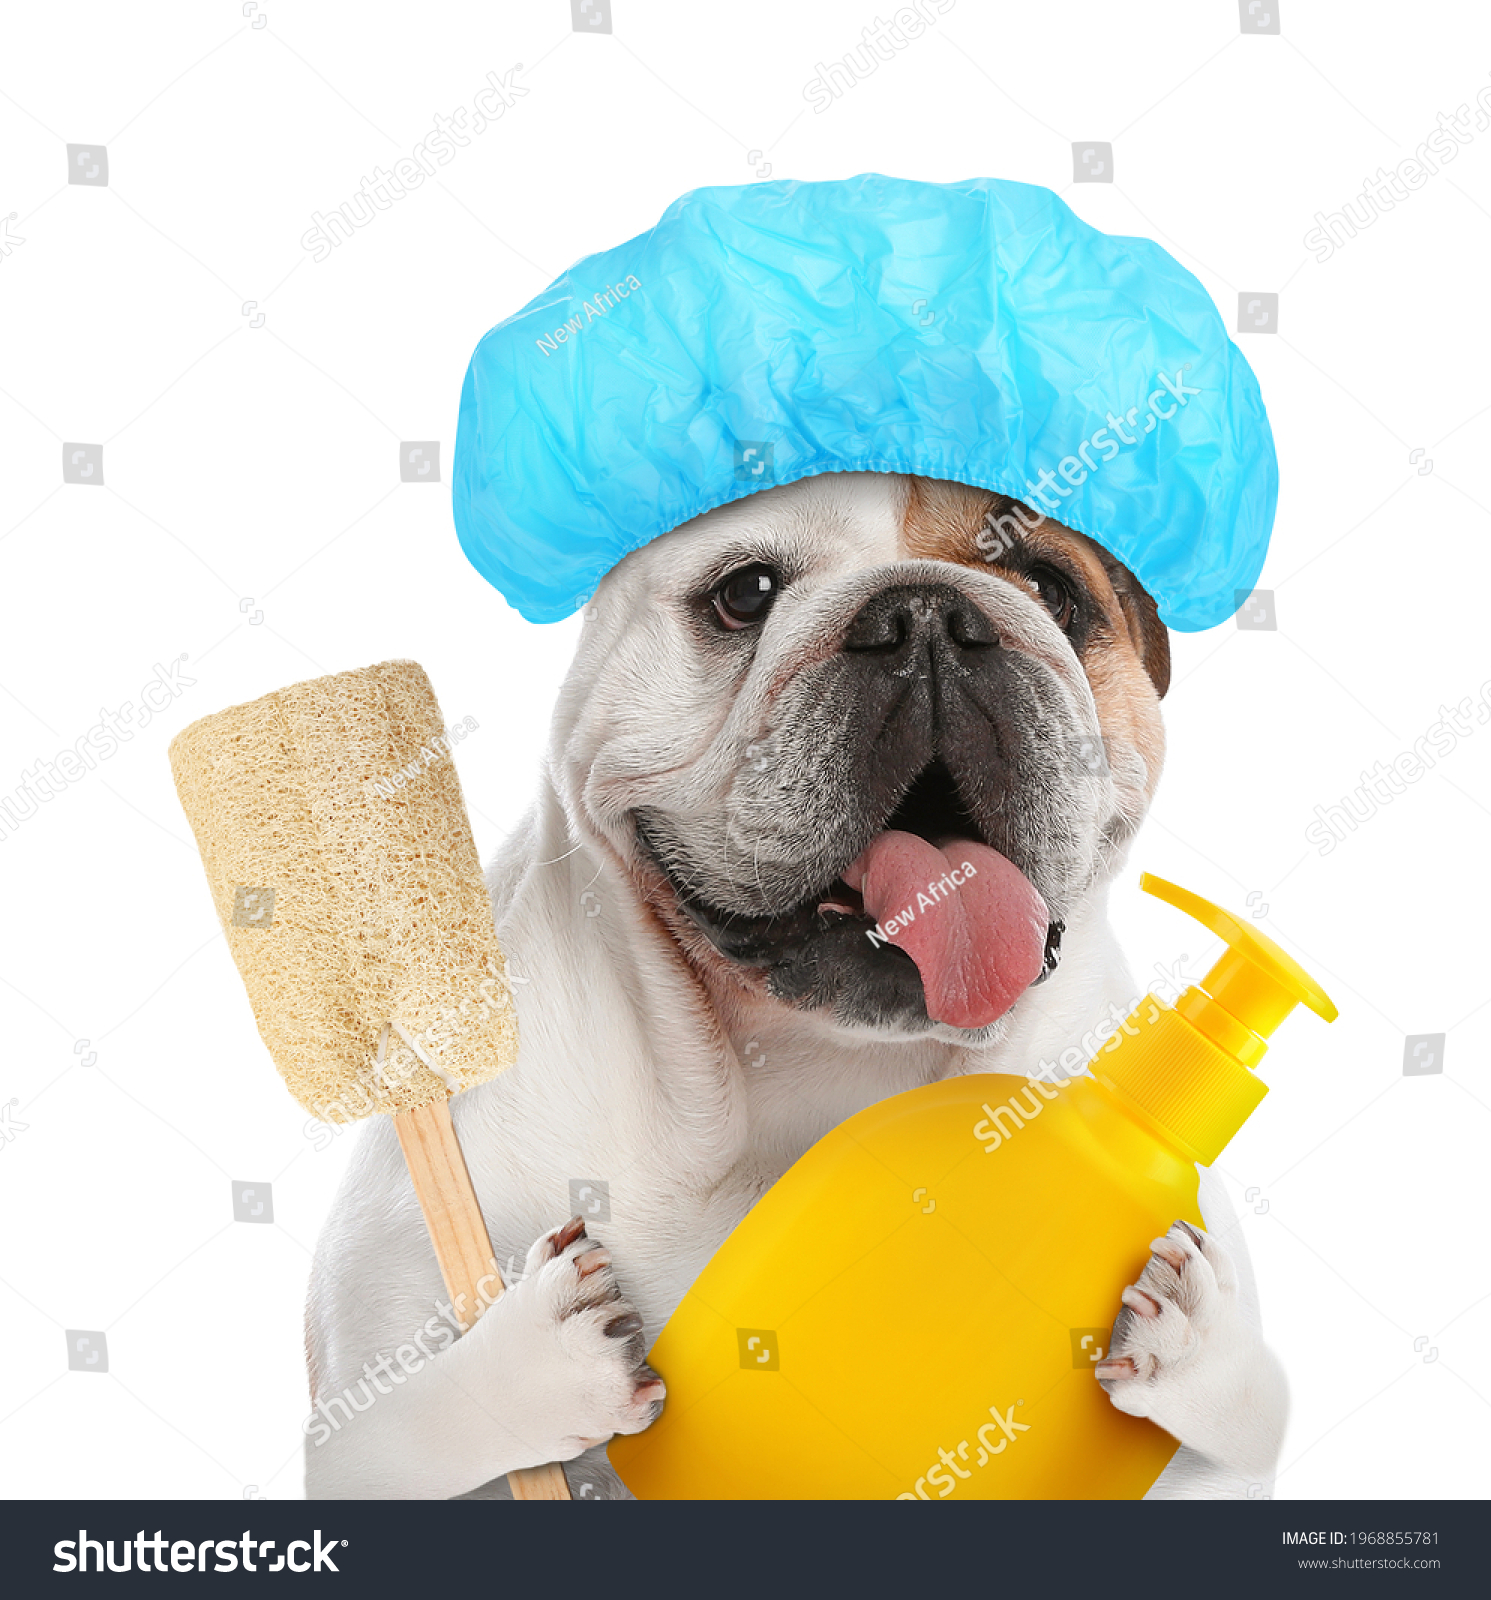 Cute funny dog with shower cap and different accessories for bathing on white background #1968855781